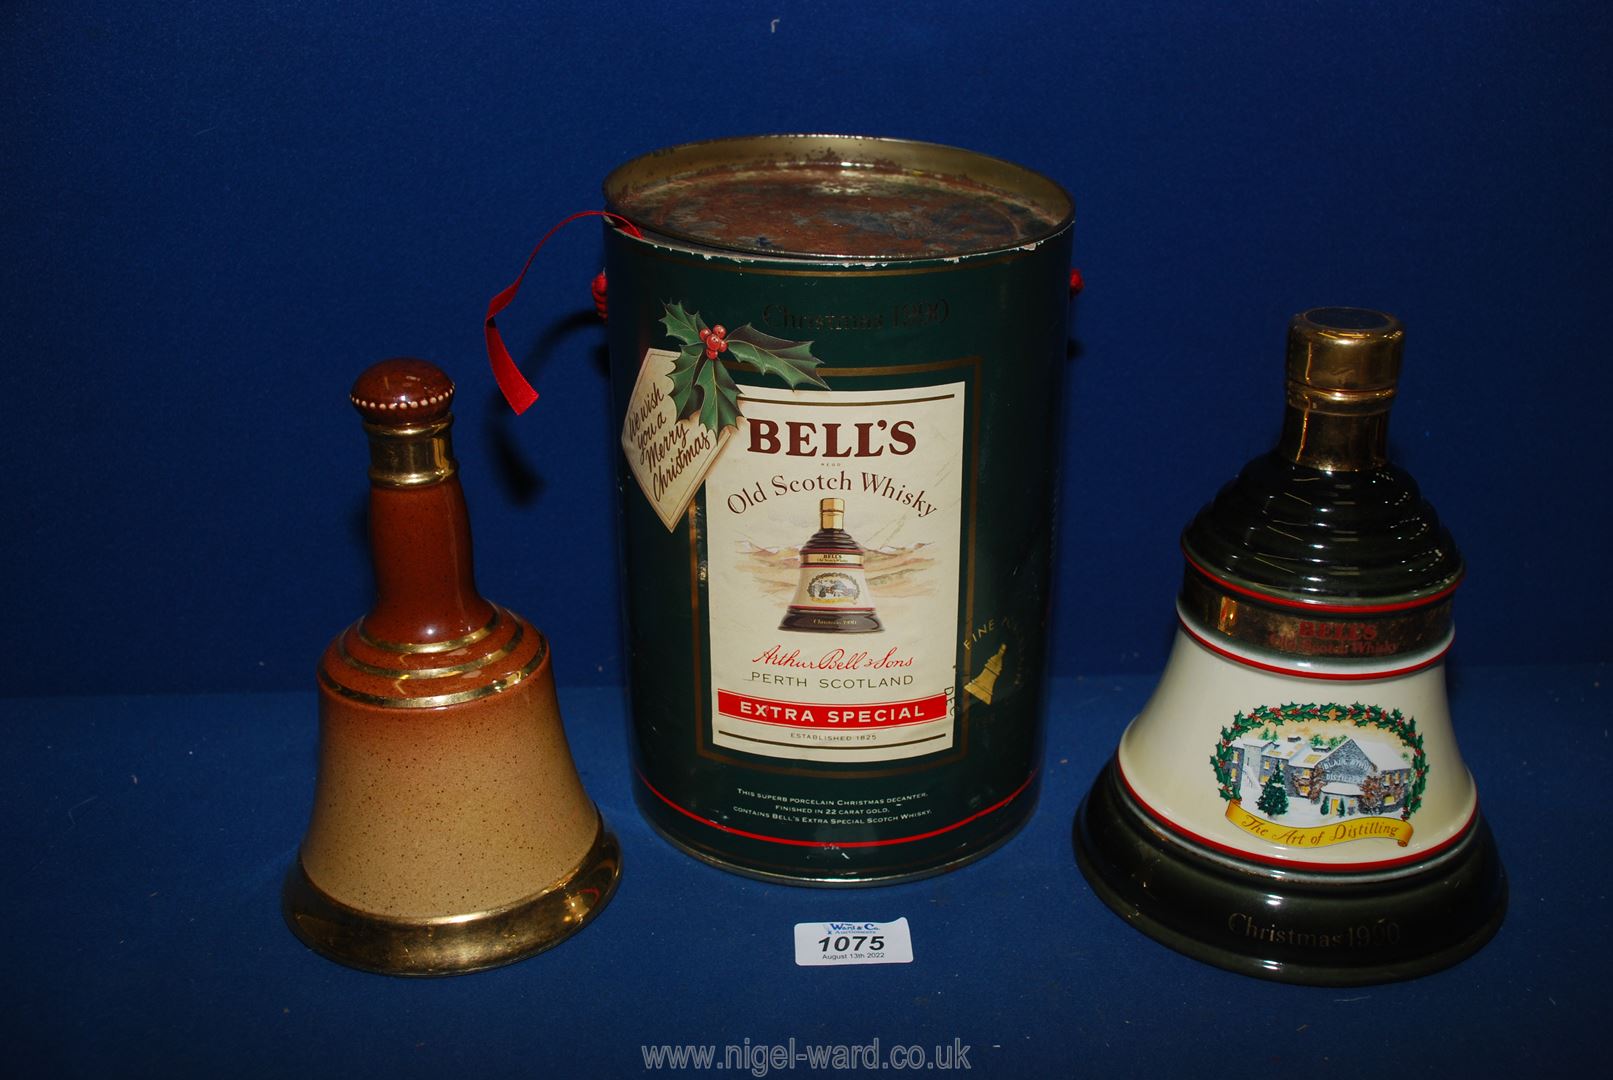 A Christmas 1990 Bells's Old Scotch whisky in tin (sealed and full) along with a Royal Doulton